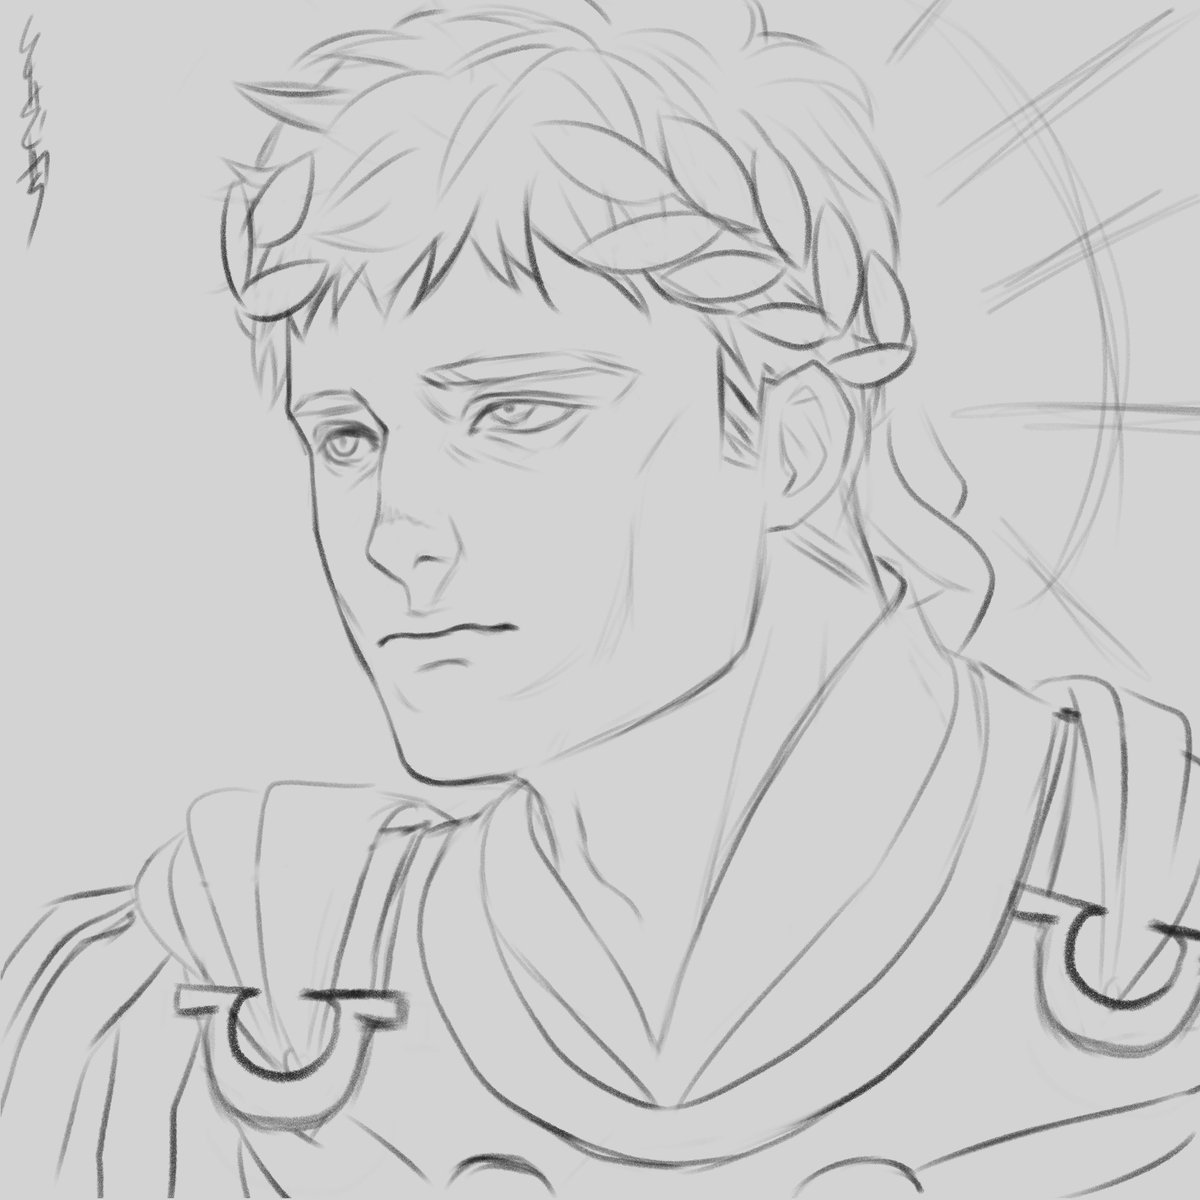 A much younger Guilliman-- maybe right after Konor's death
This is just a scratchy sketch, I will be back to color him properly🫶
#RobouteGuilliman #Ultramarines #warhammer40k #WarhammerCommunity #WarhammerArt